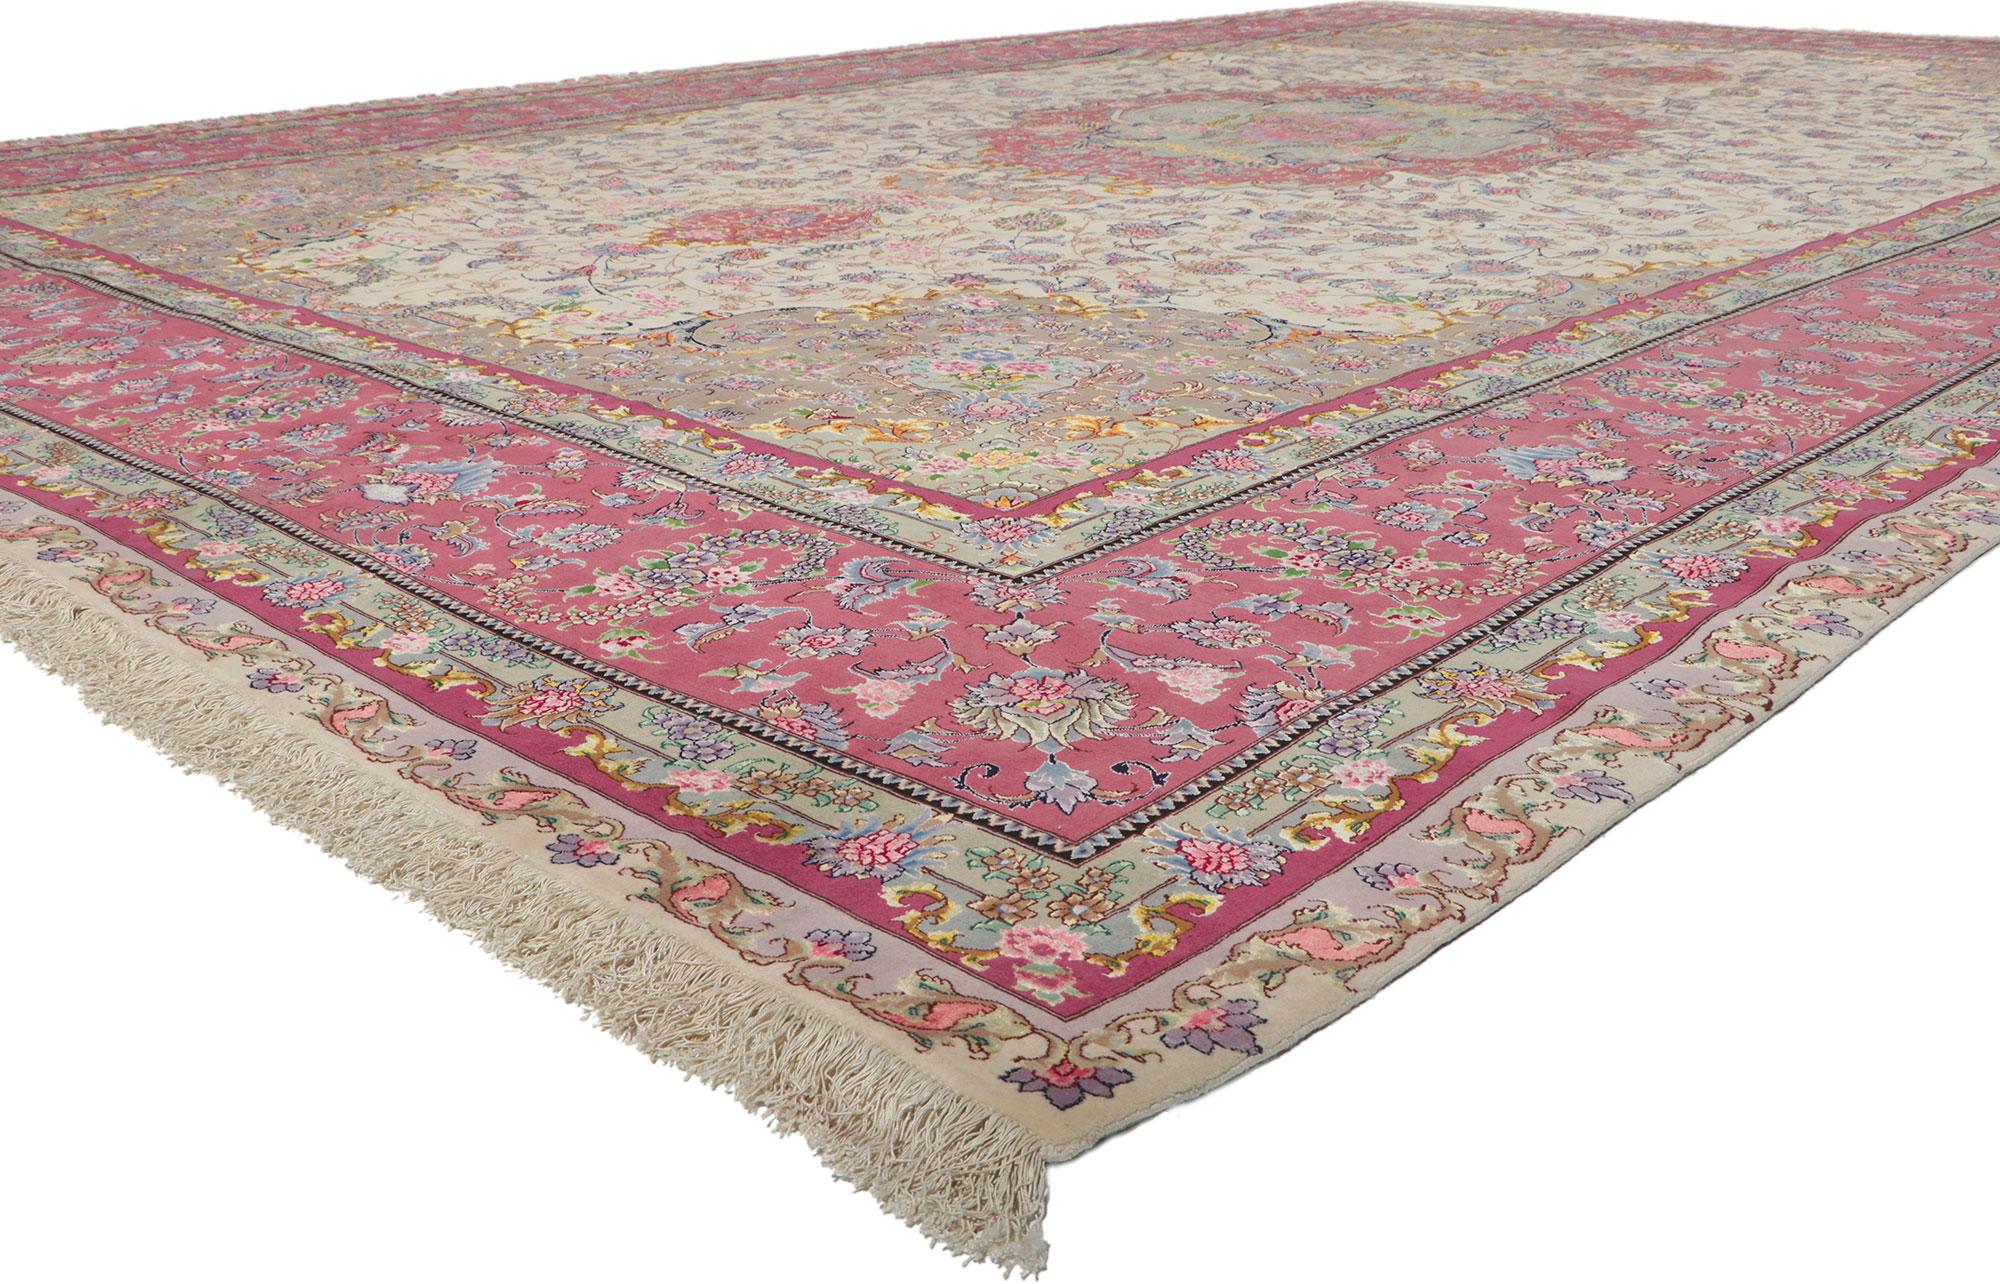 78326 vintage Persian Tabriz rug, 12'09 x 19'09.
Displaying an impressive array of floral elements with incredible detail and texture, this hand knotted wool and silk vintage Persian Tabriz rug is a captivating vision of woven beauty. The timeless